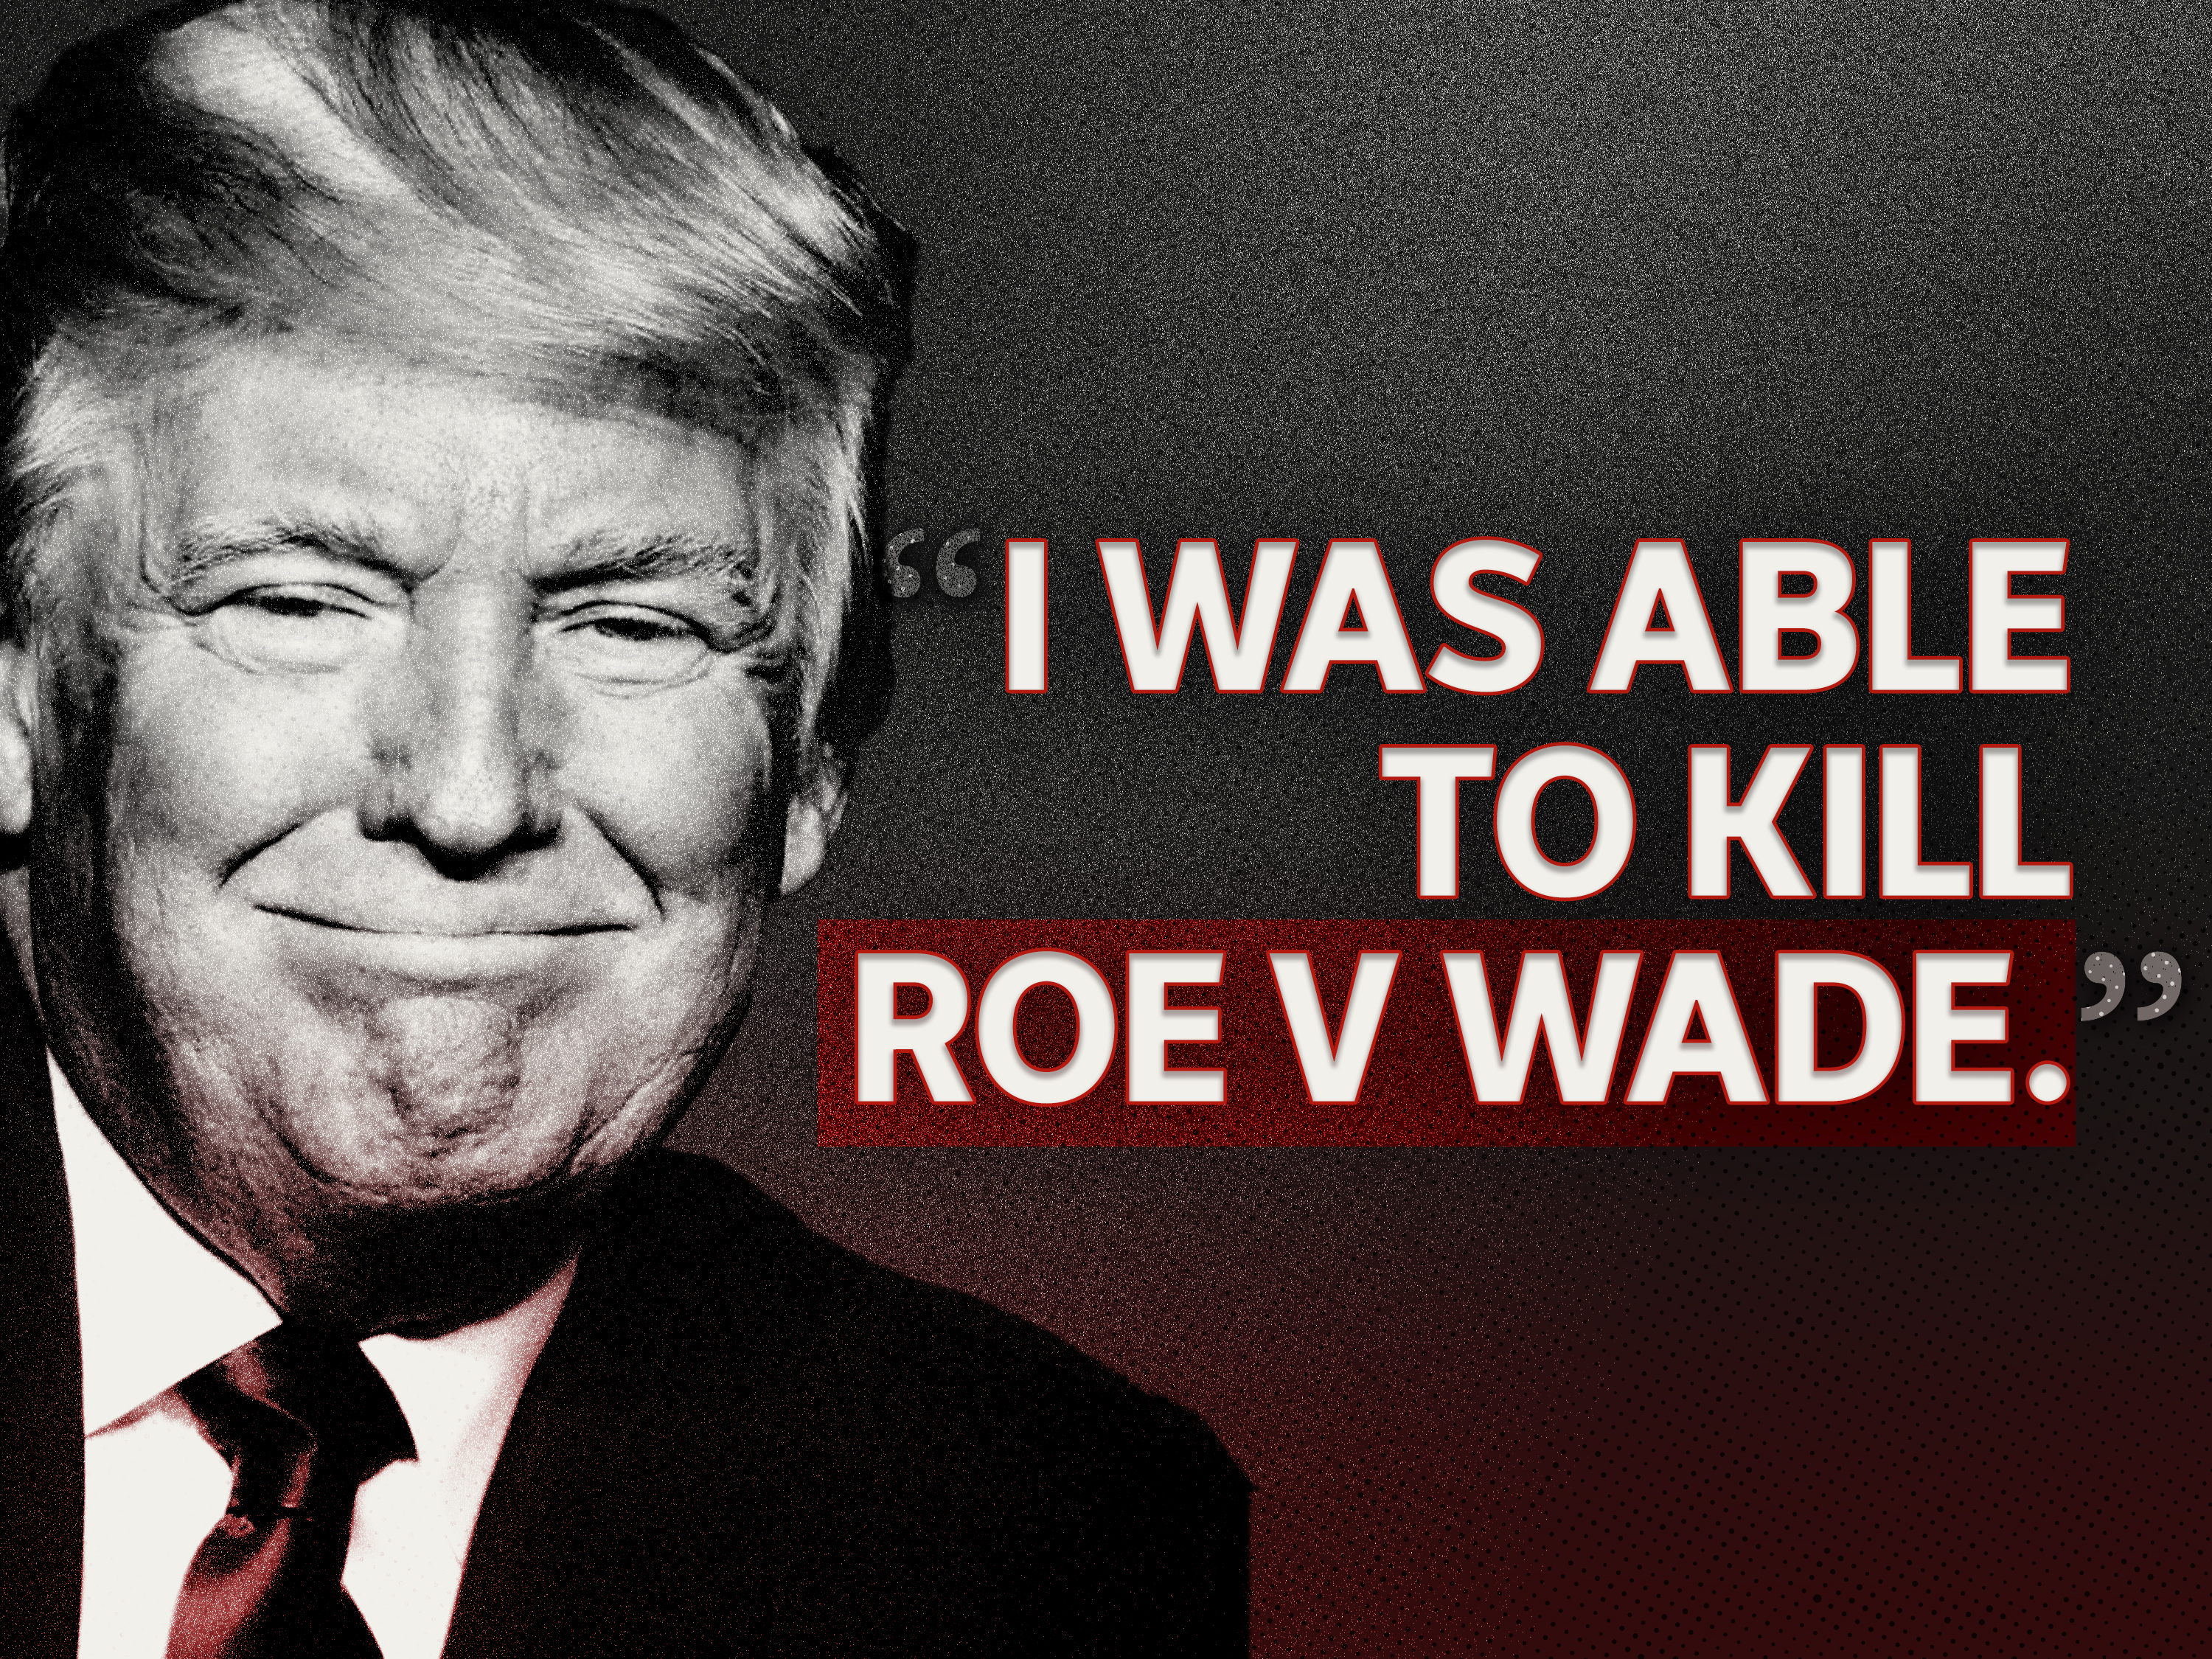 A headshot of Donald Trump next to the words "I was able to kill Roe v Wade".